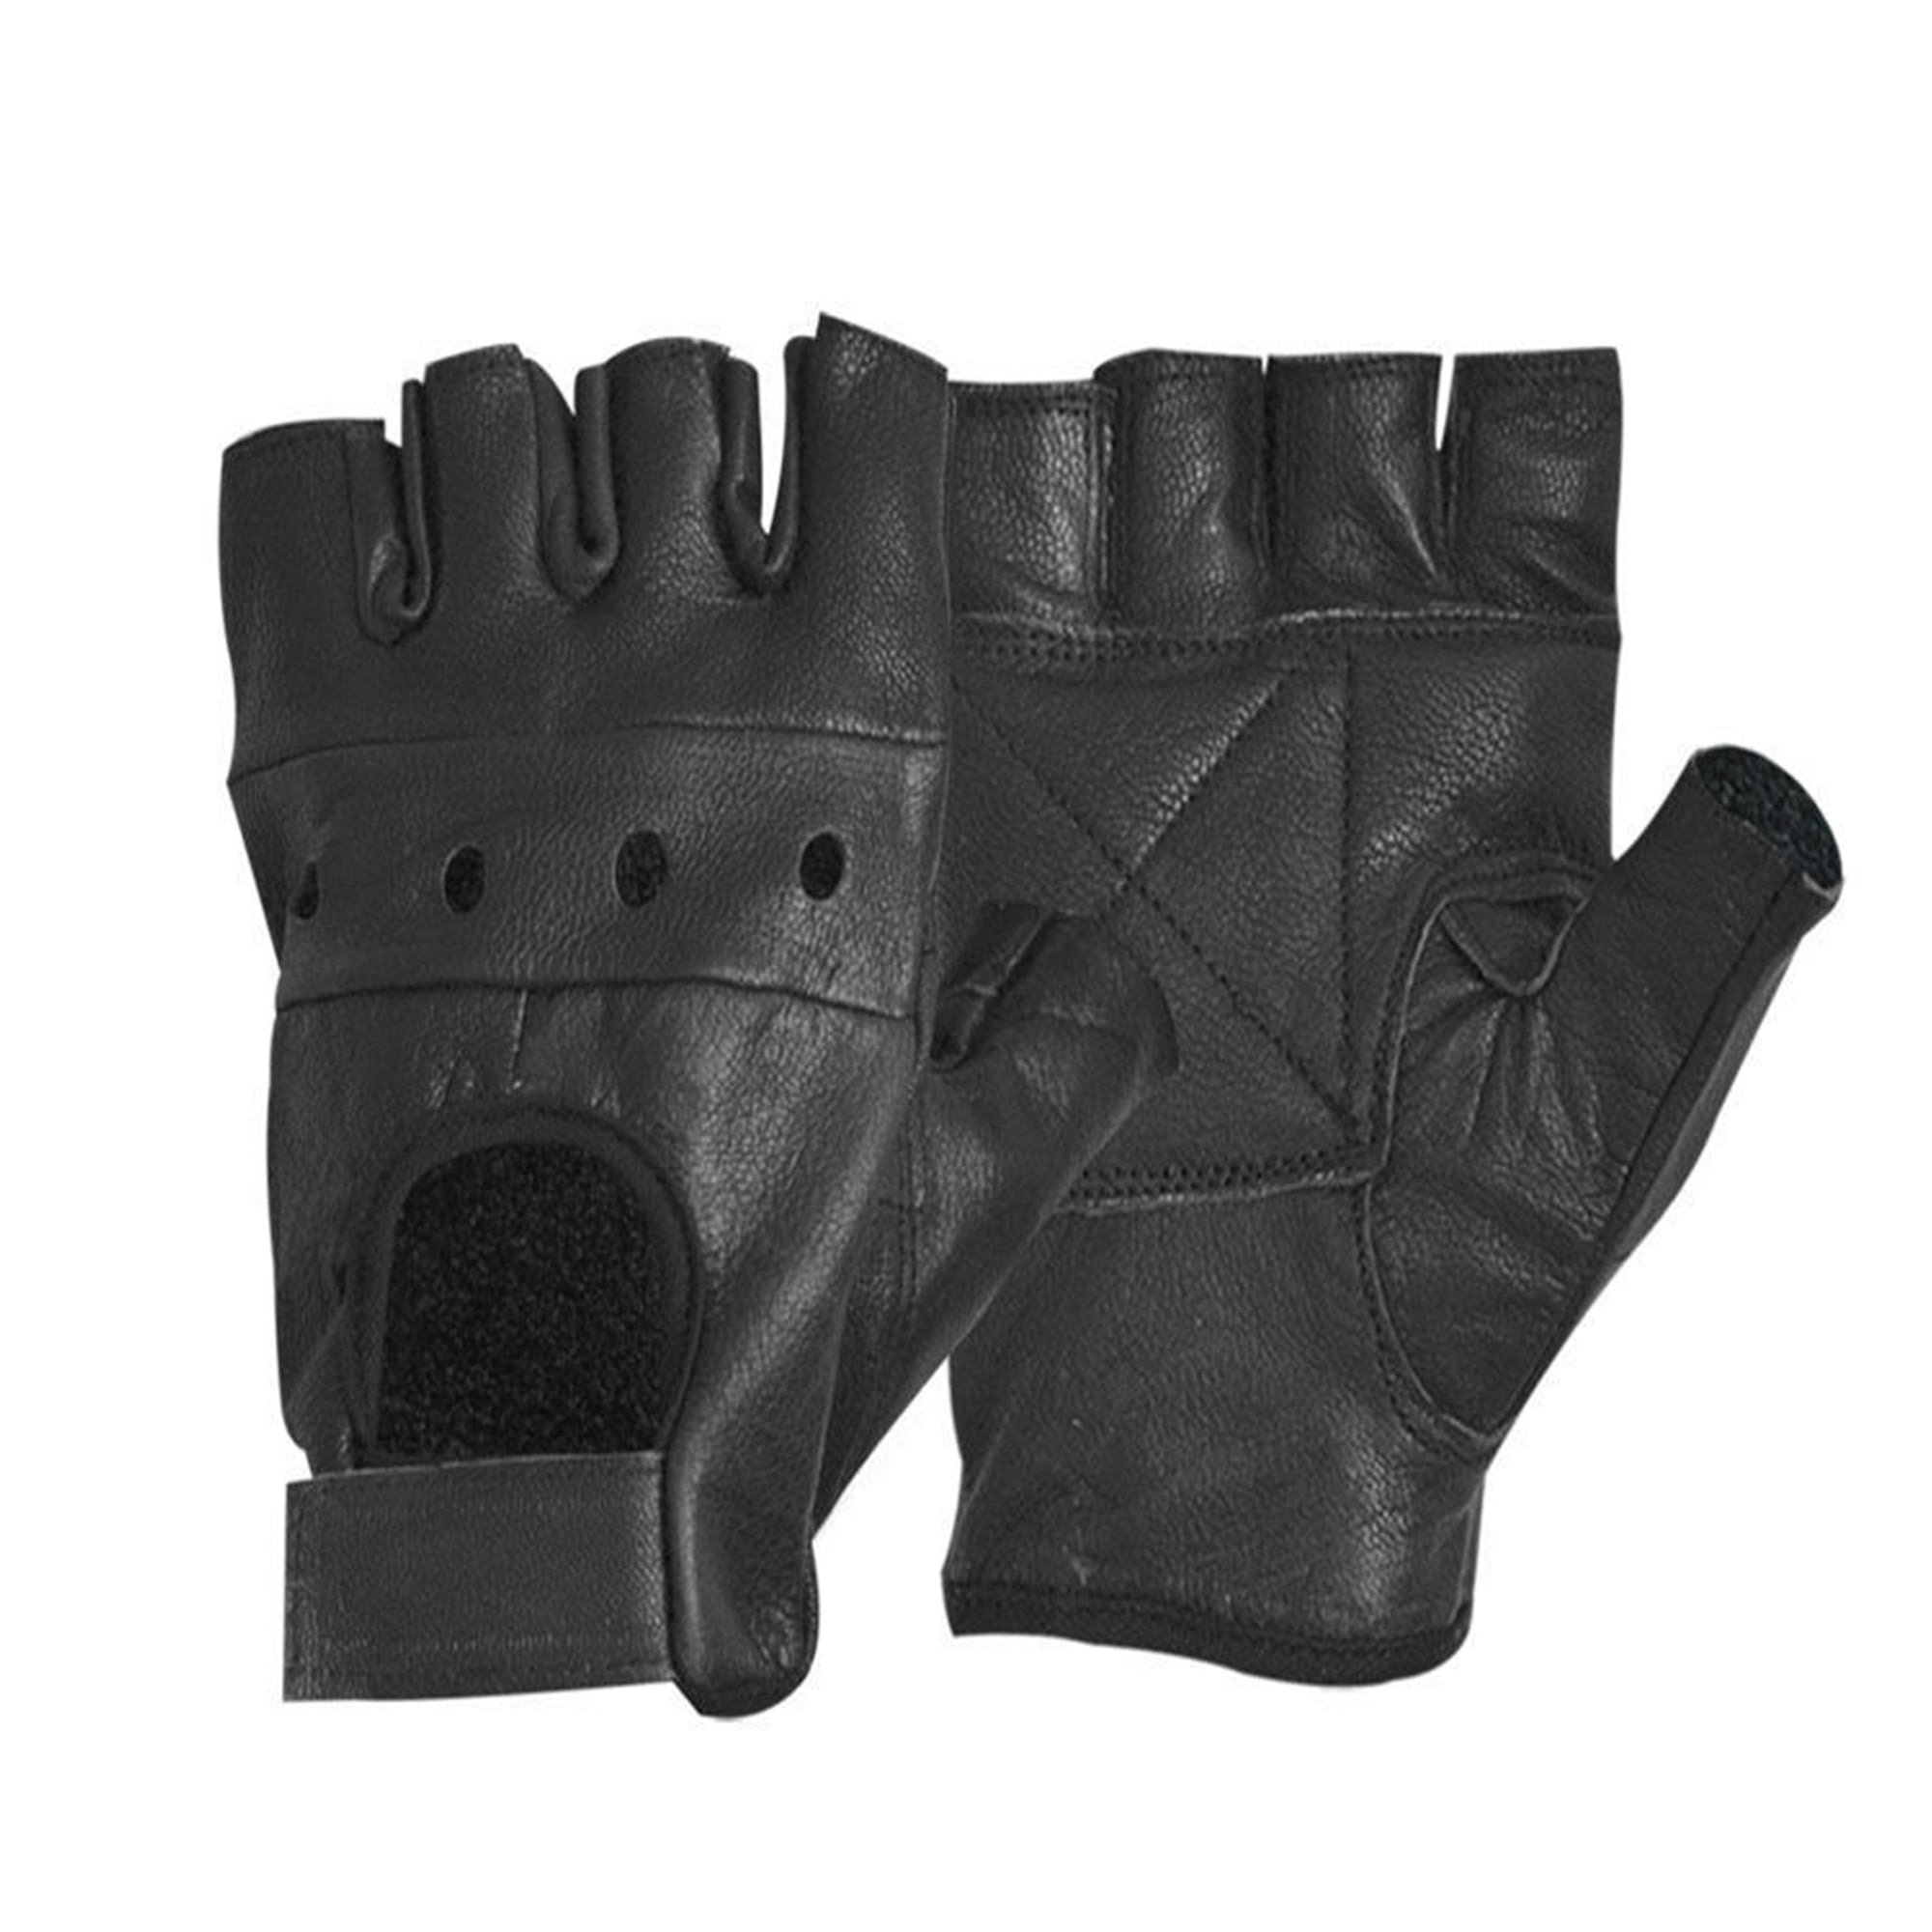 Mens Ladies fingerless sports work cycling weightlifting gloves 